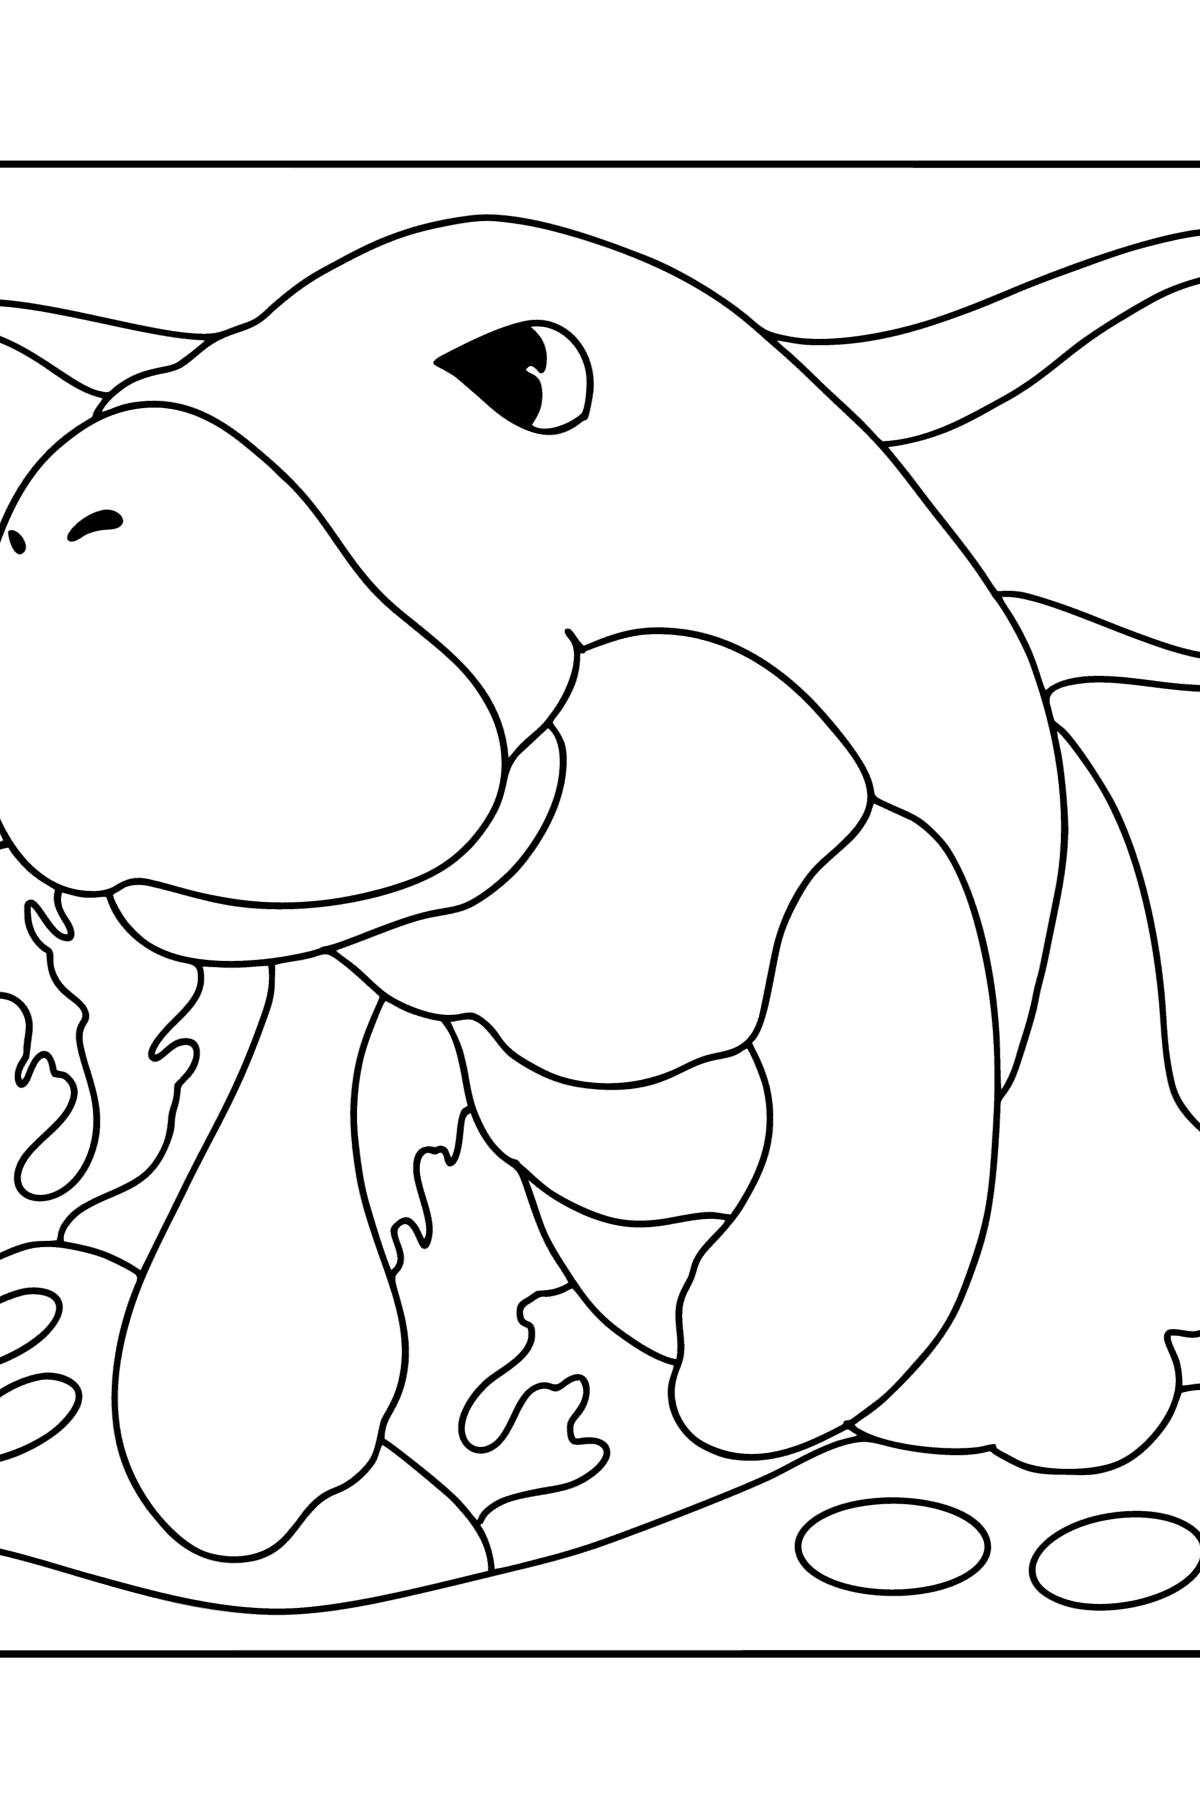 Manatee coloring page - Coloring Pages for Kids